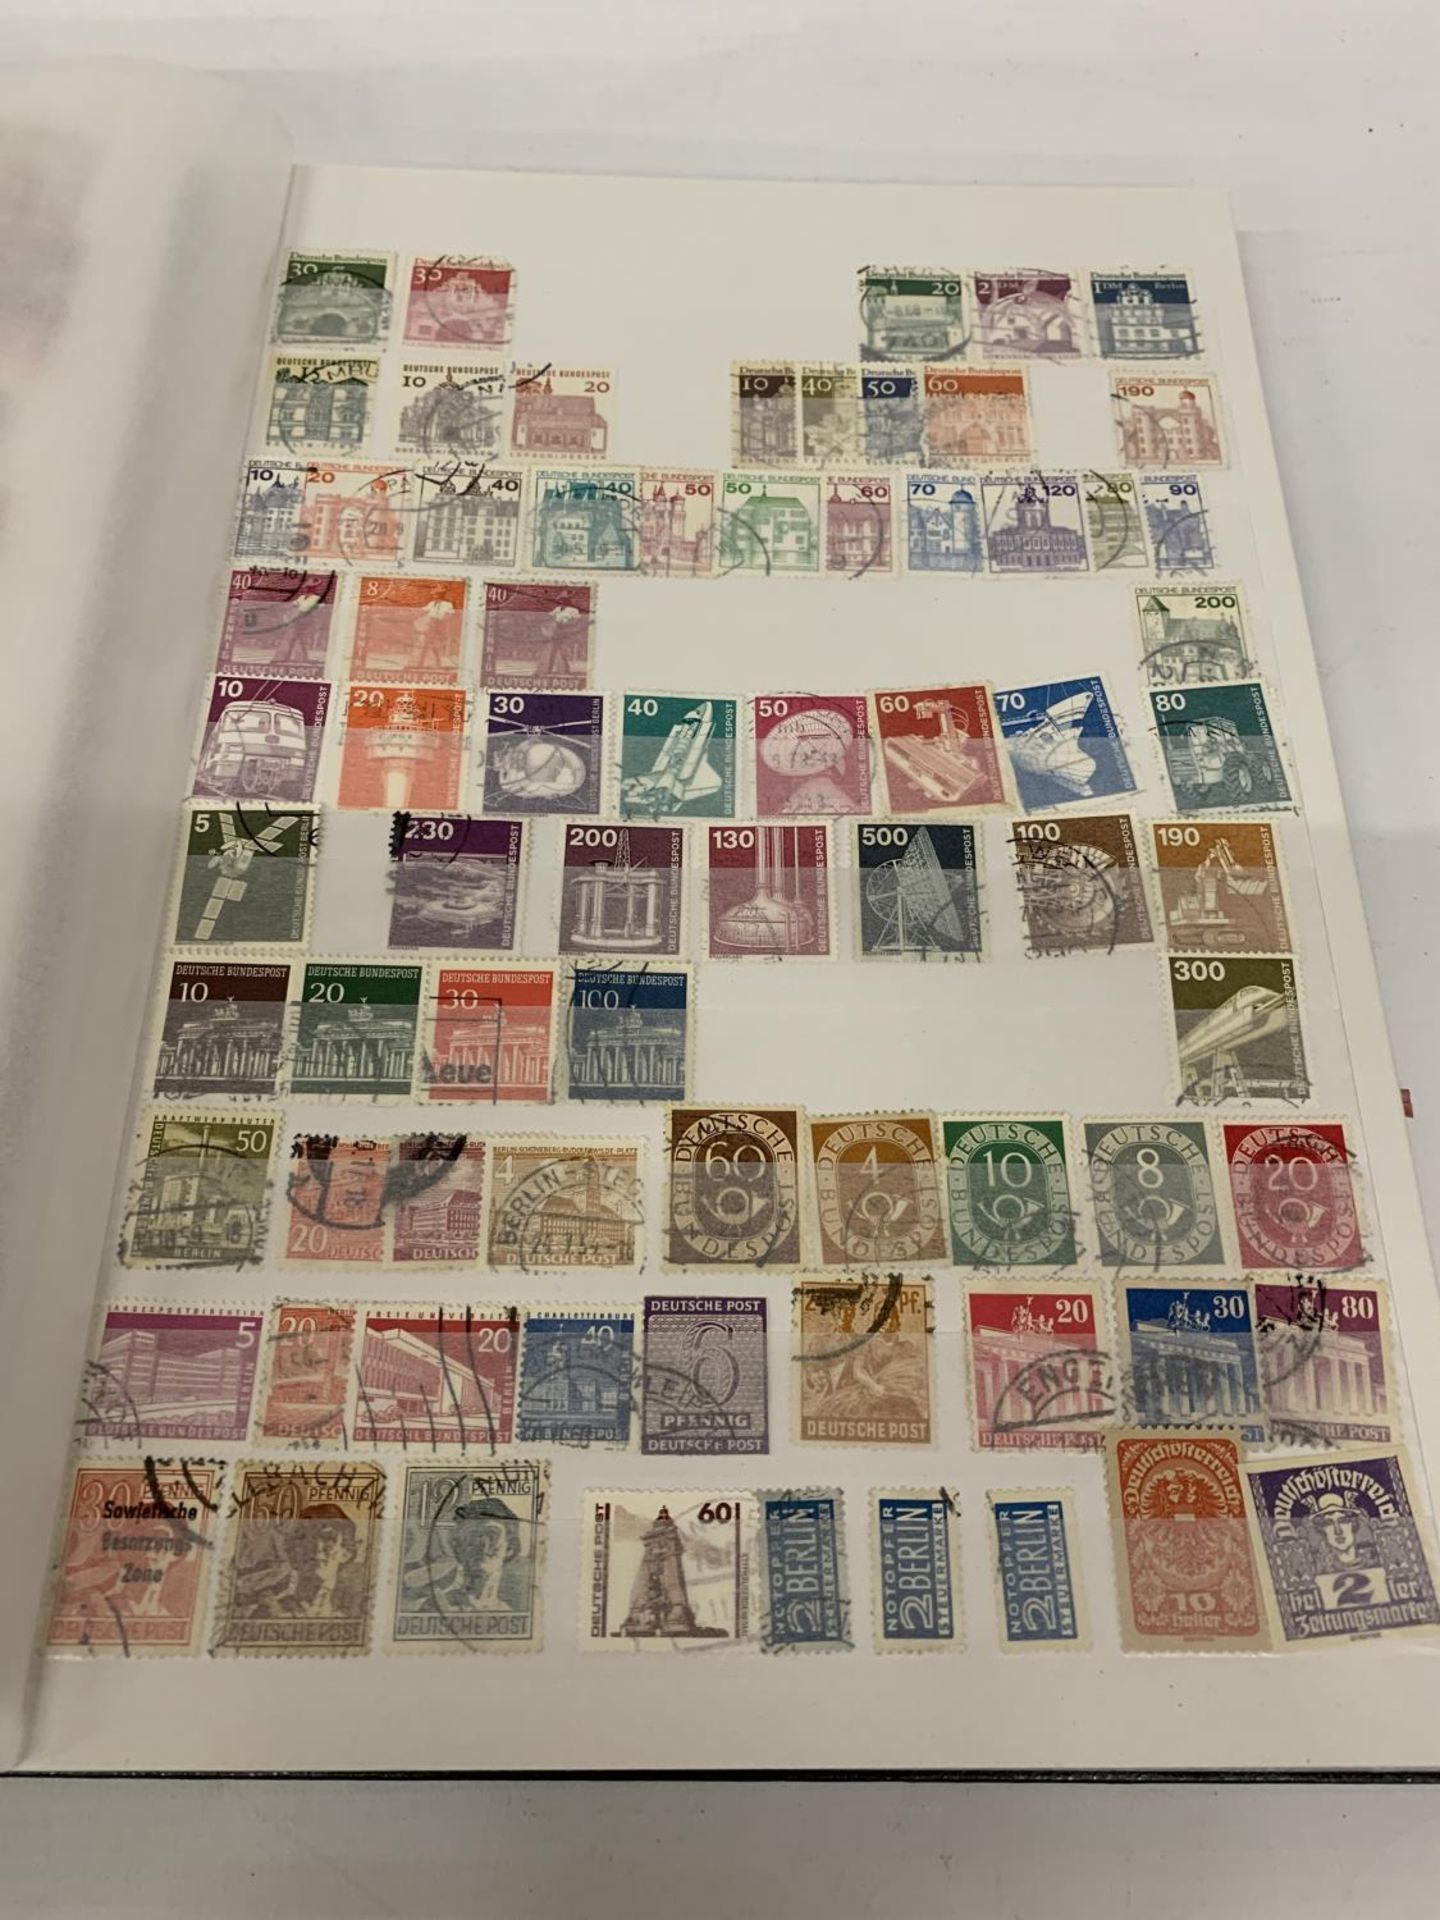 A STAMP ALBUM CONTAINING STAMPS FROM GERMANY AND DDR - Image 3 of 5